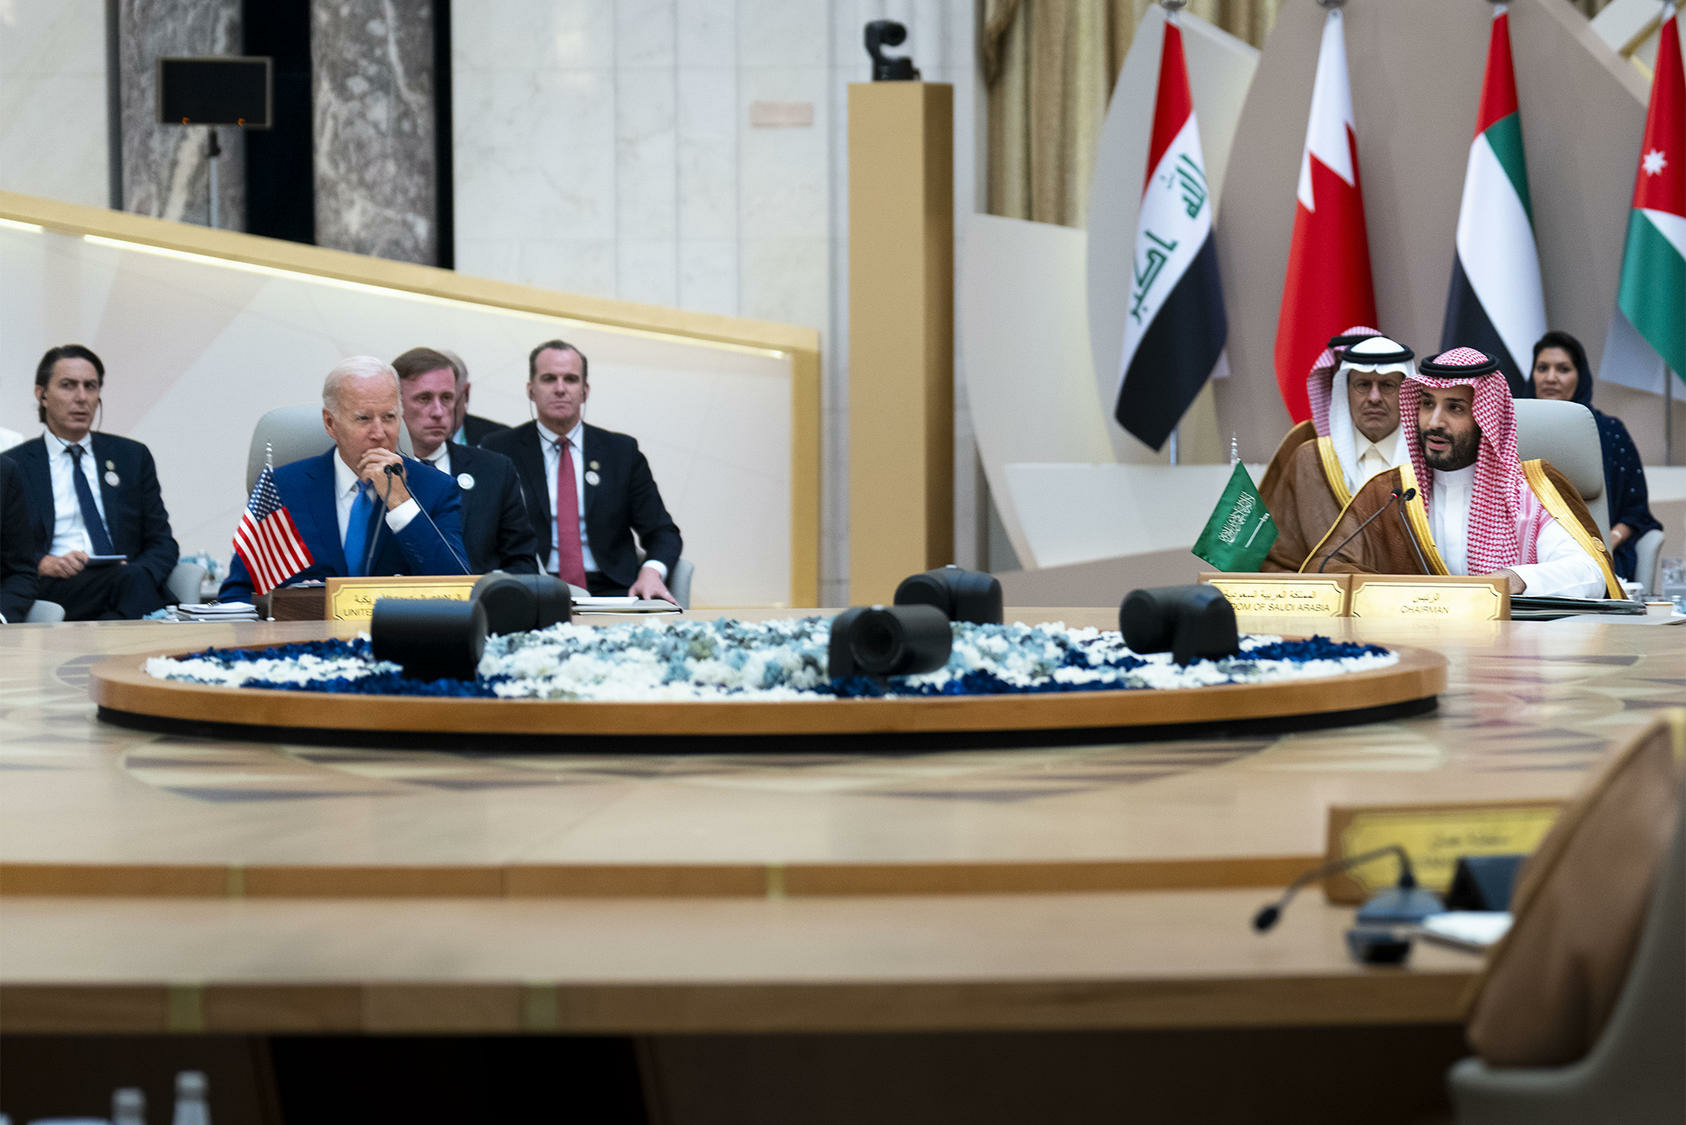 Five-course take-away from Biden's visit to the Middle East